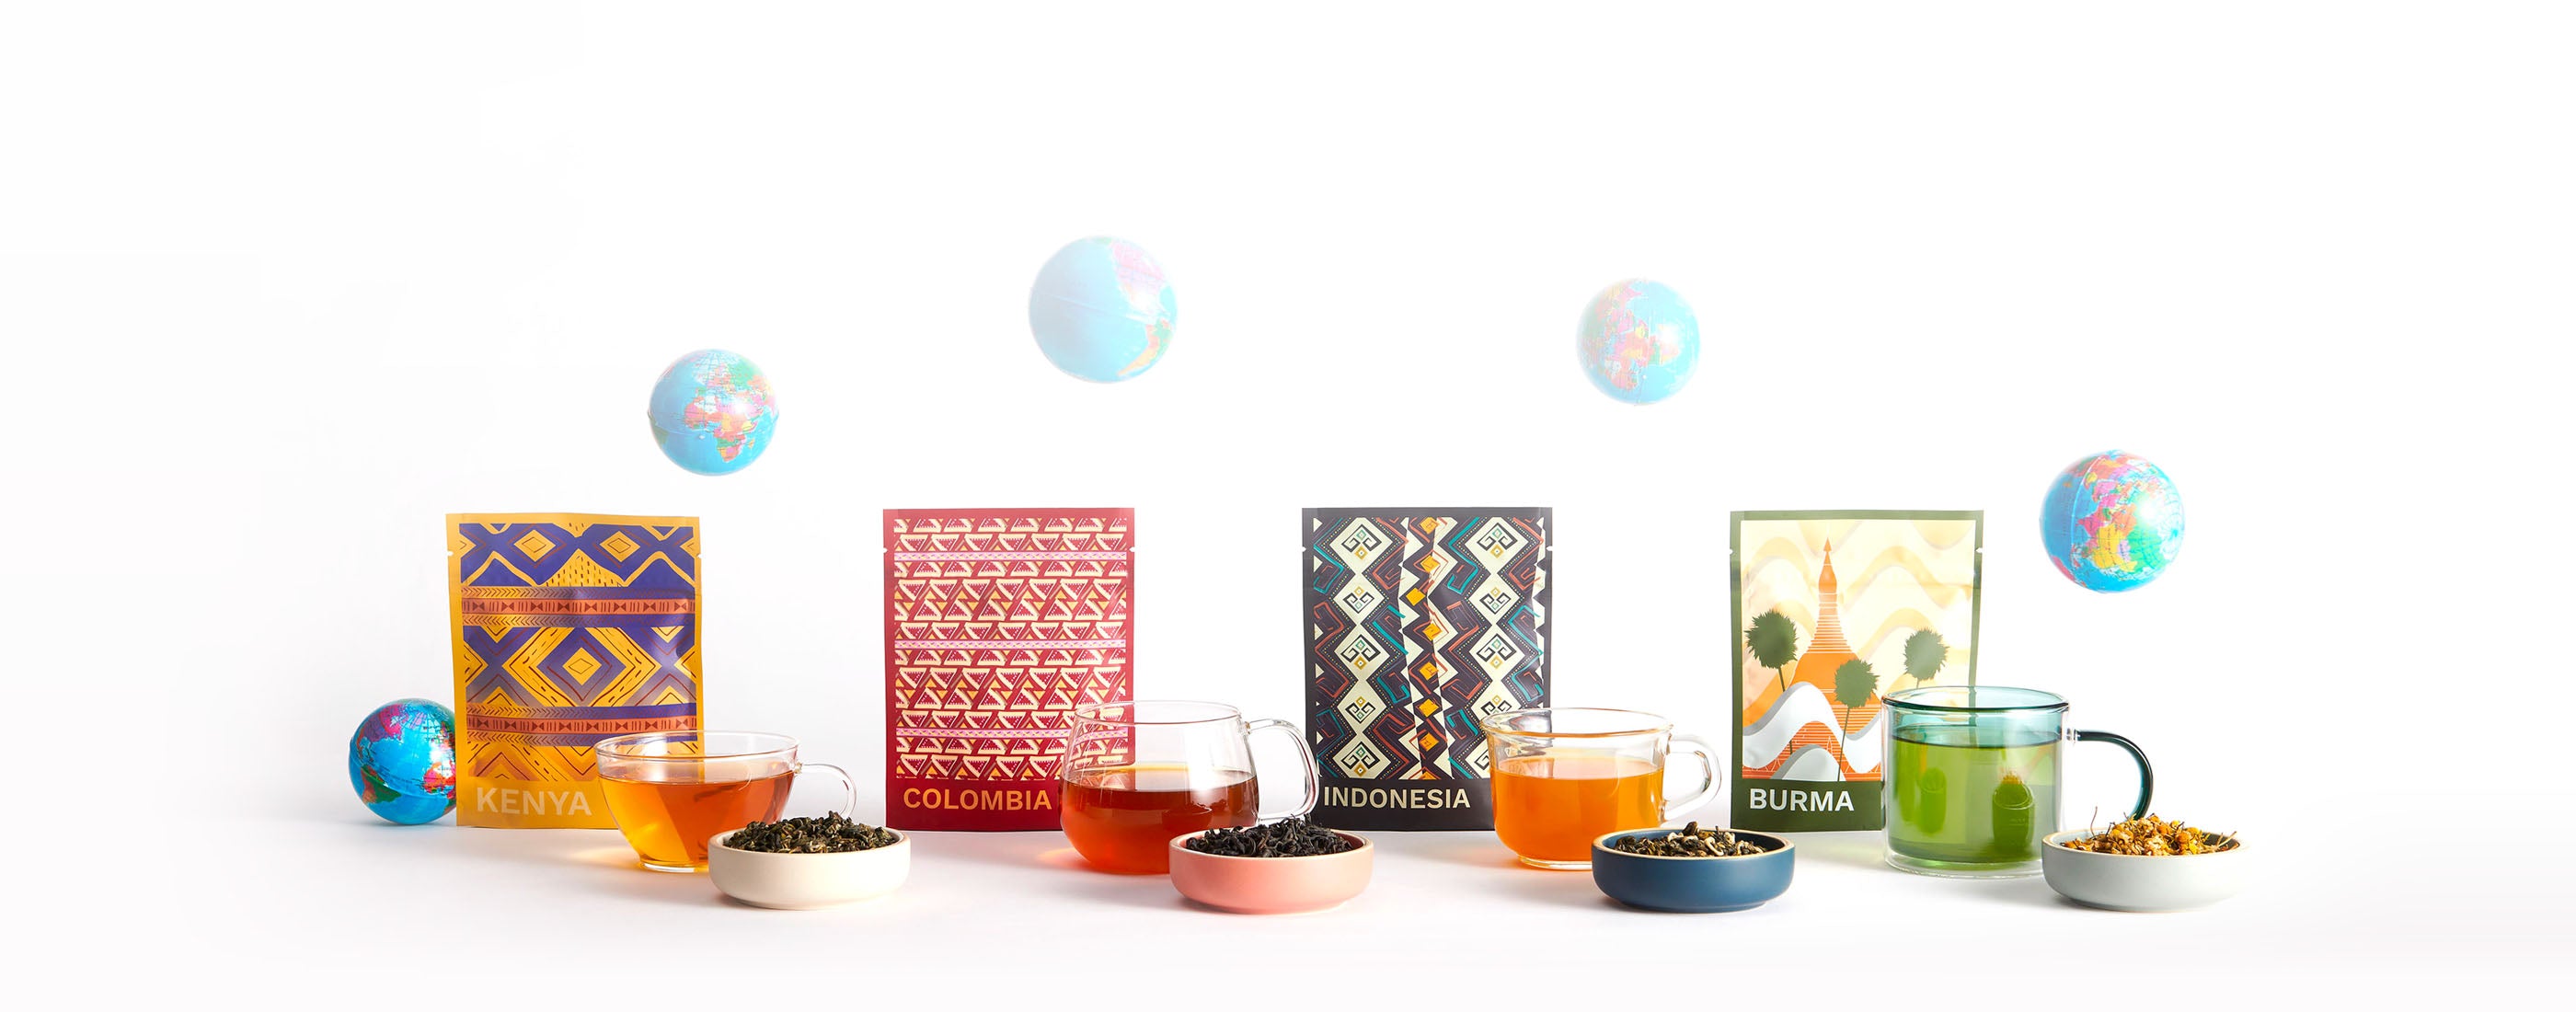 An assortment of teas in colorful patterned packaging next to cups of tea